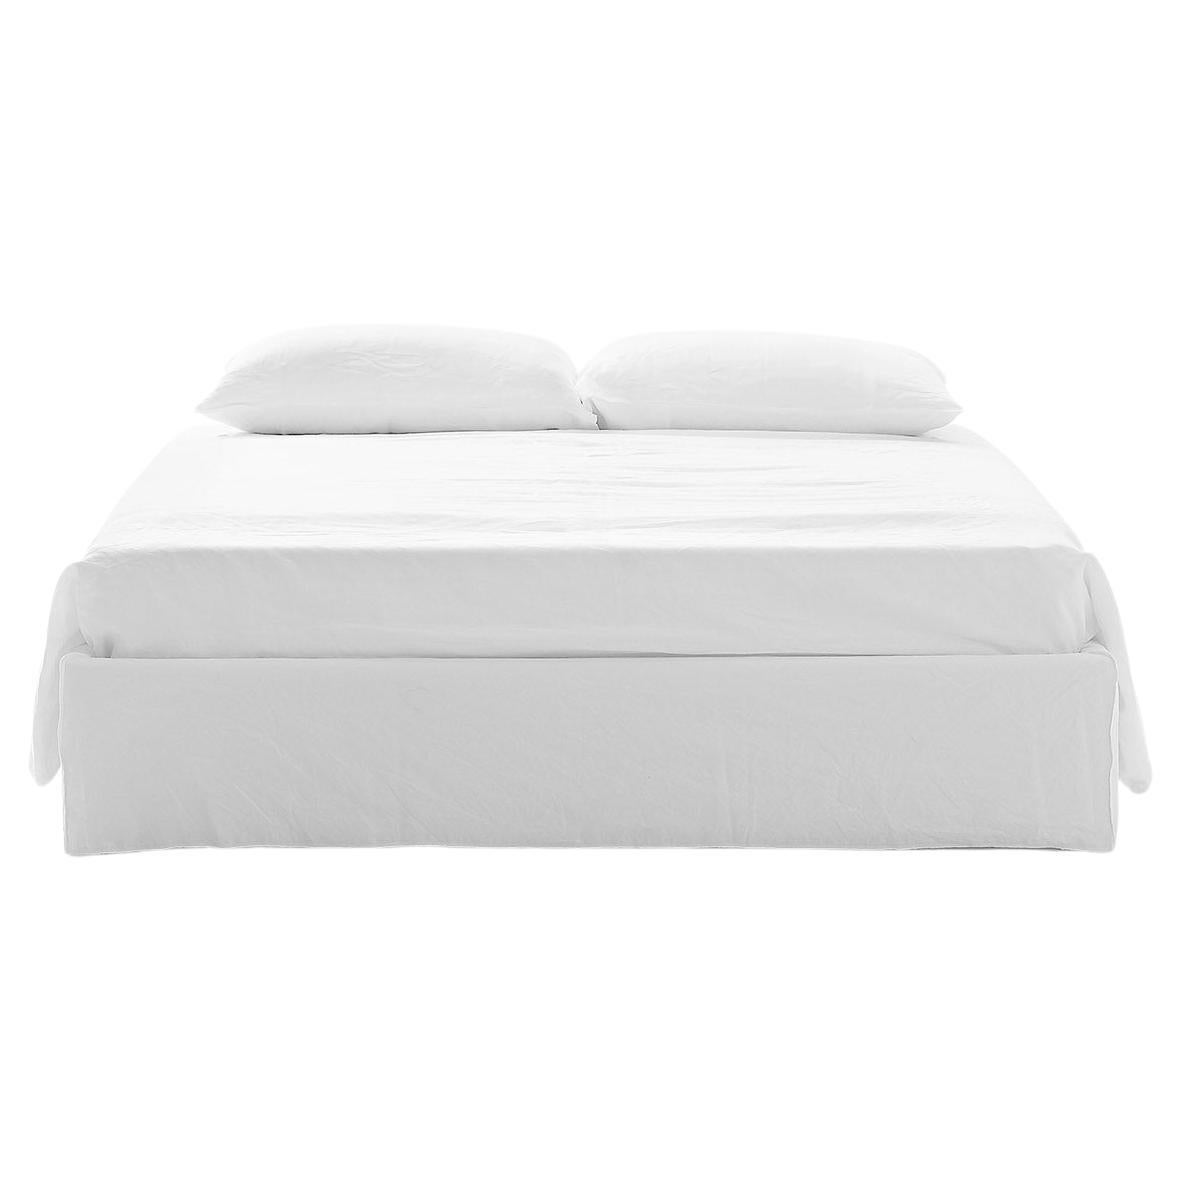 Gervasoni Ghost 80 Queen L Bed in White Linen Upholstery, Paola Navone For Sale